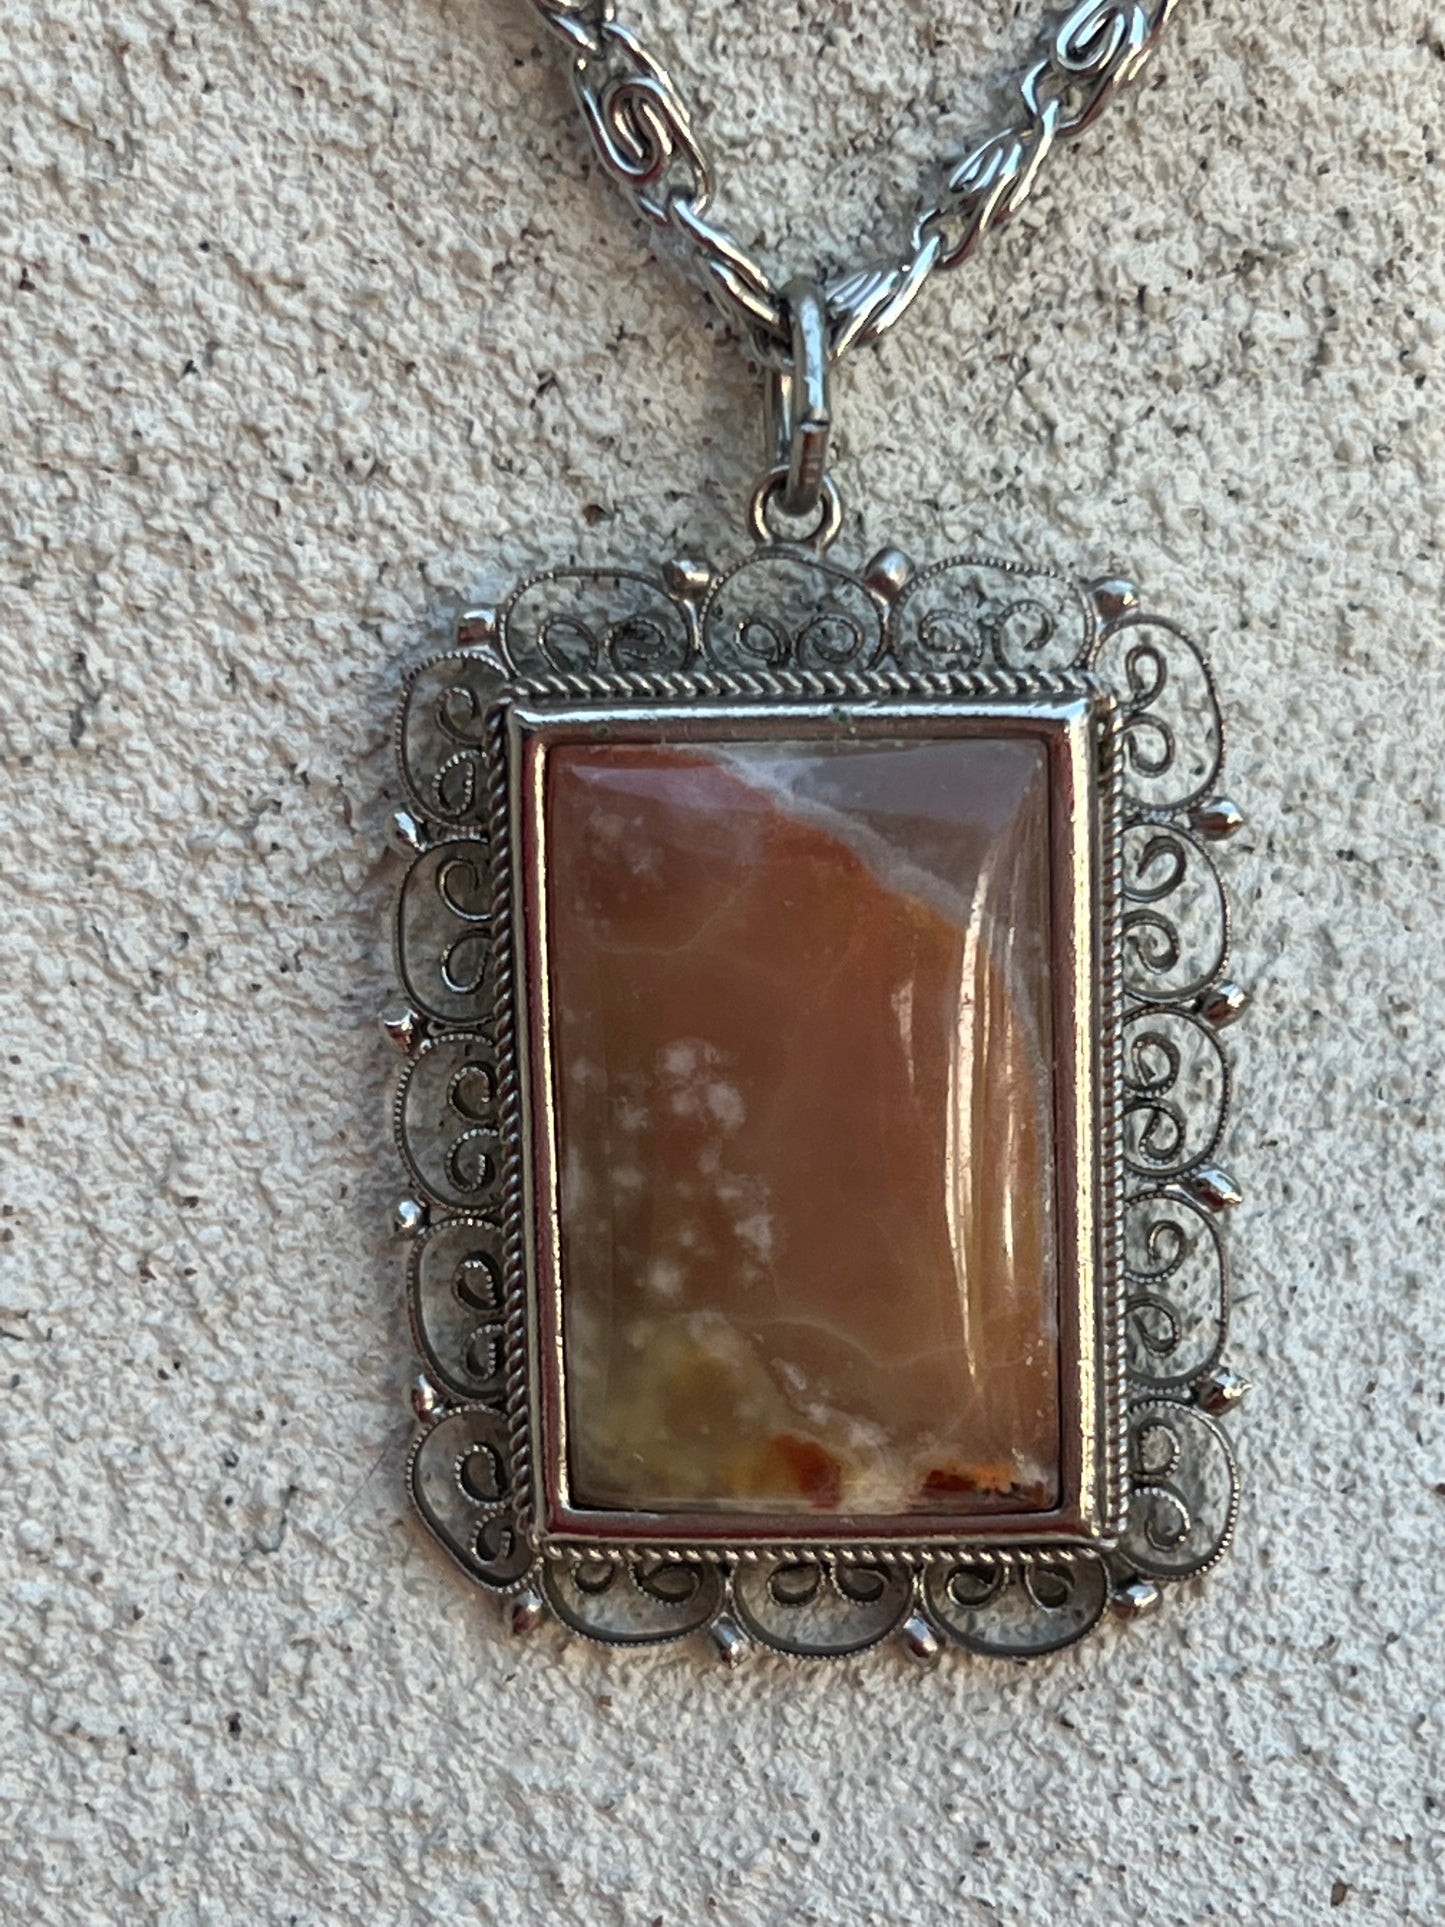 Uniquely Lady Slippers Italian Agate Pendant Necklace